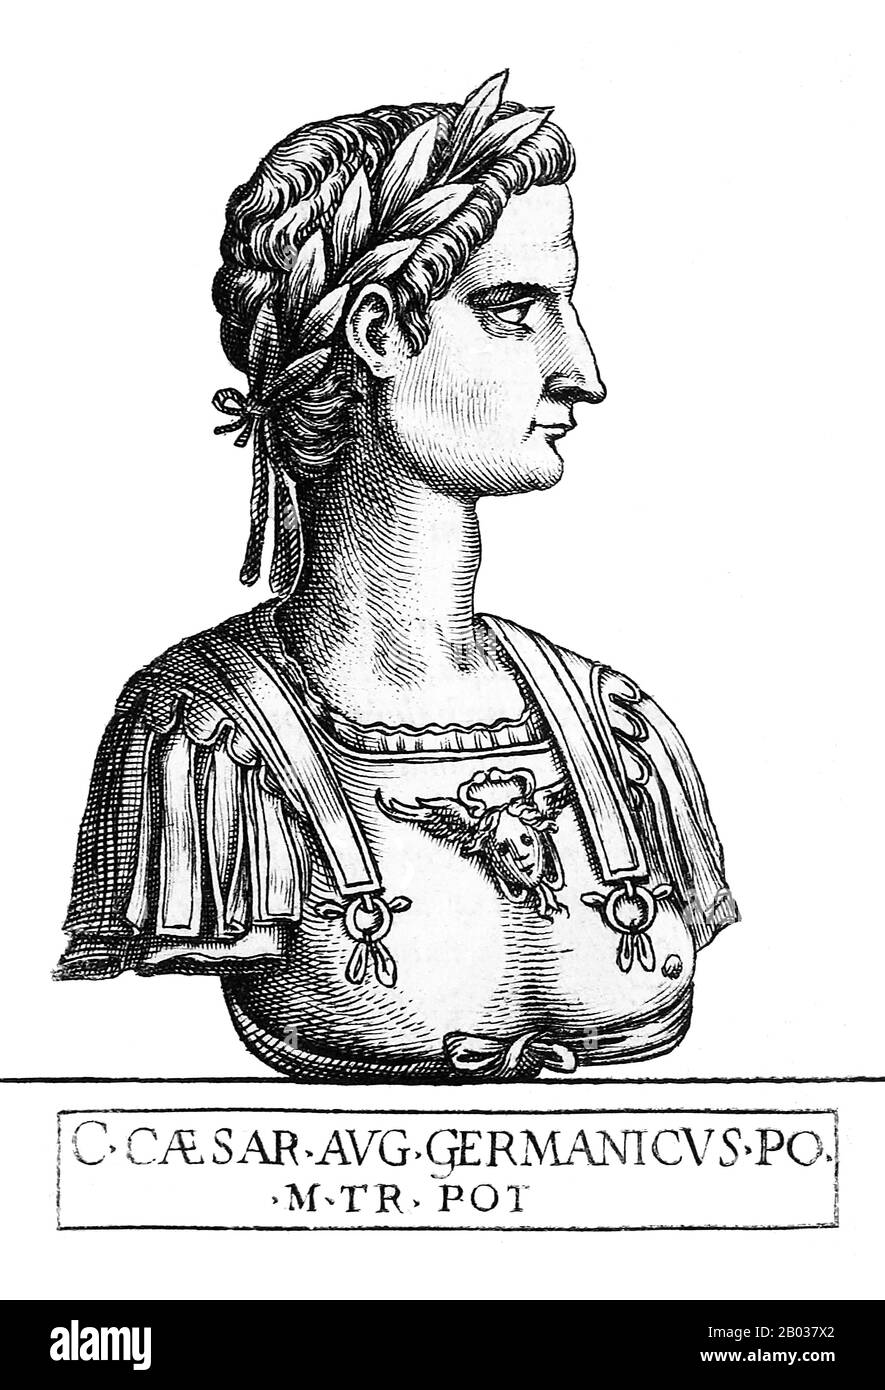 Born Gaius Julius Caesar Germanicus, Caligula was the nephew and adopted son  of Emperor Tiberius, making him part of the Julio-Claudian dynasty. He  earned the nickname 'Caligula' (little solder's boot) while accompanying